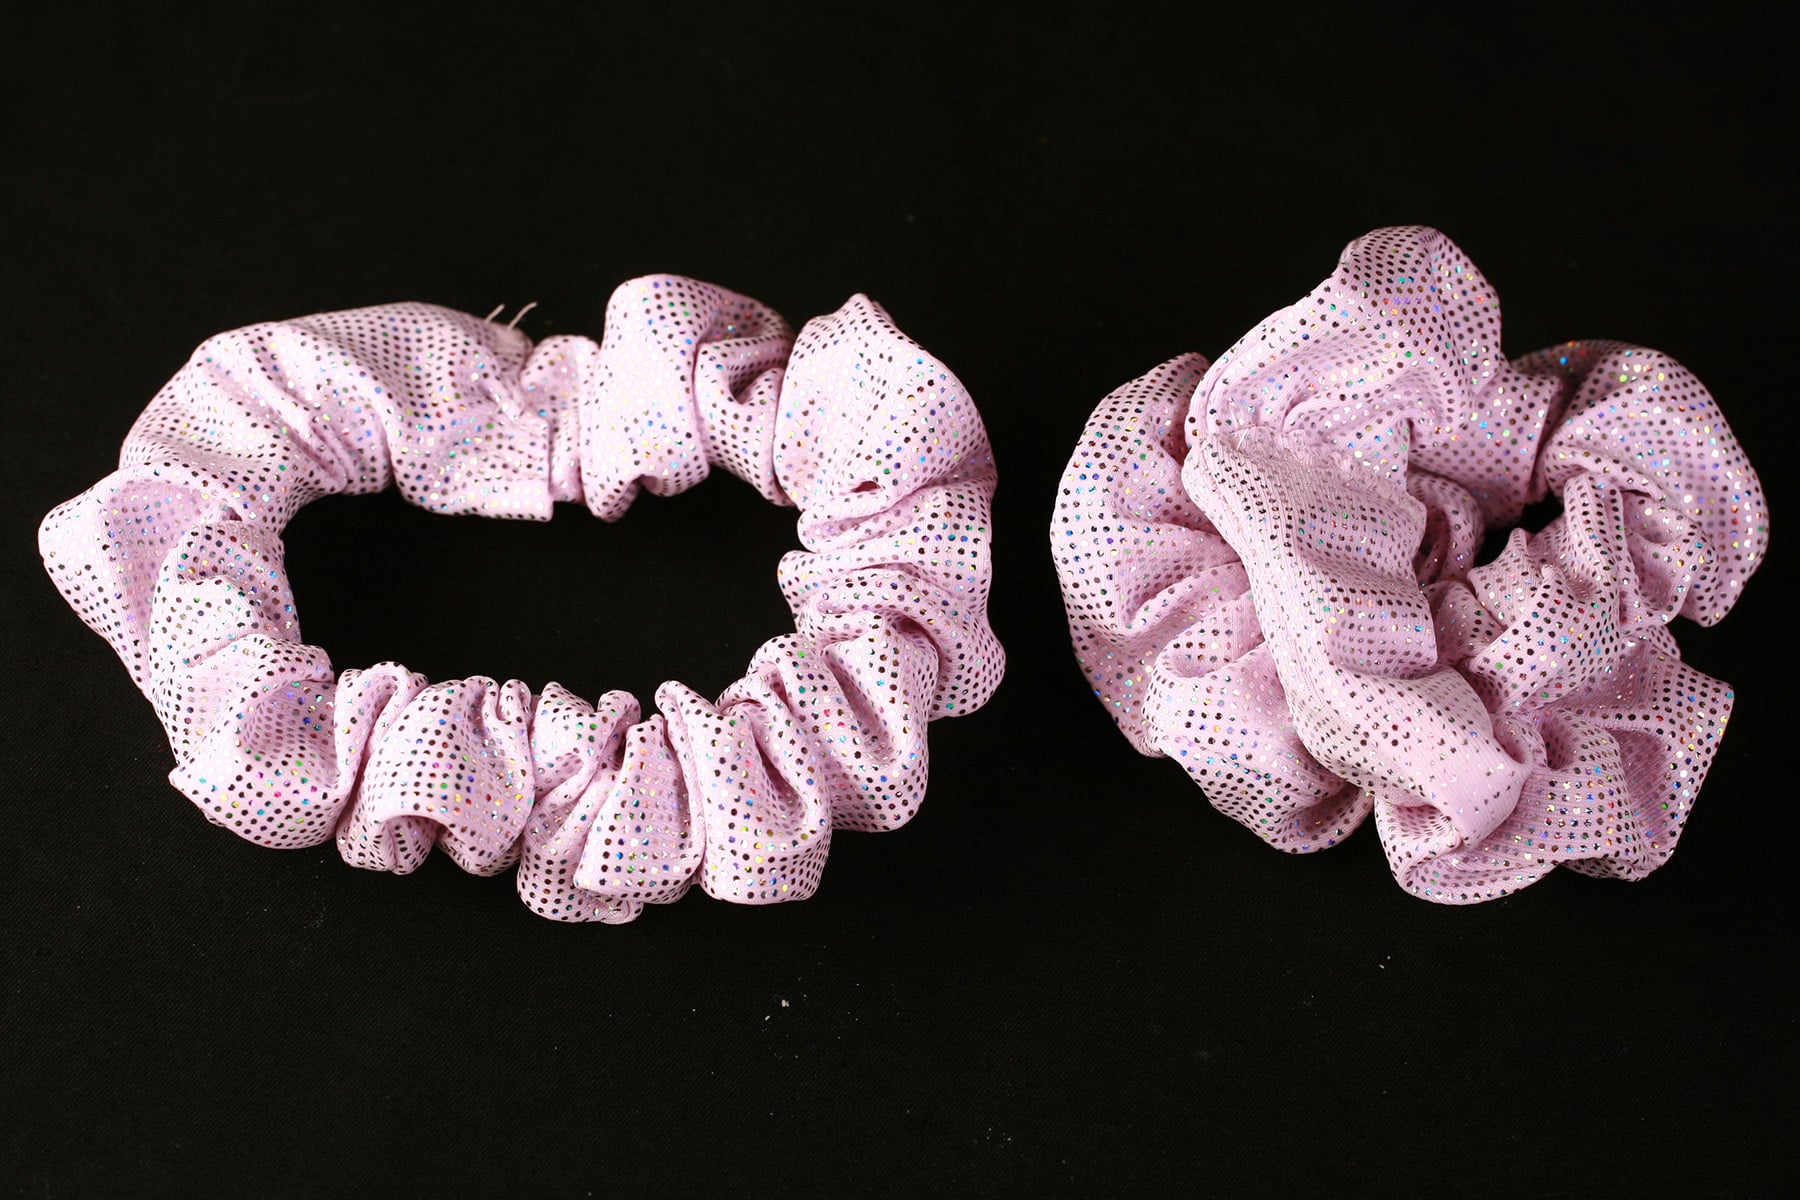 Two sparkling light pink scrunchies are shown against a black background.